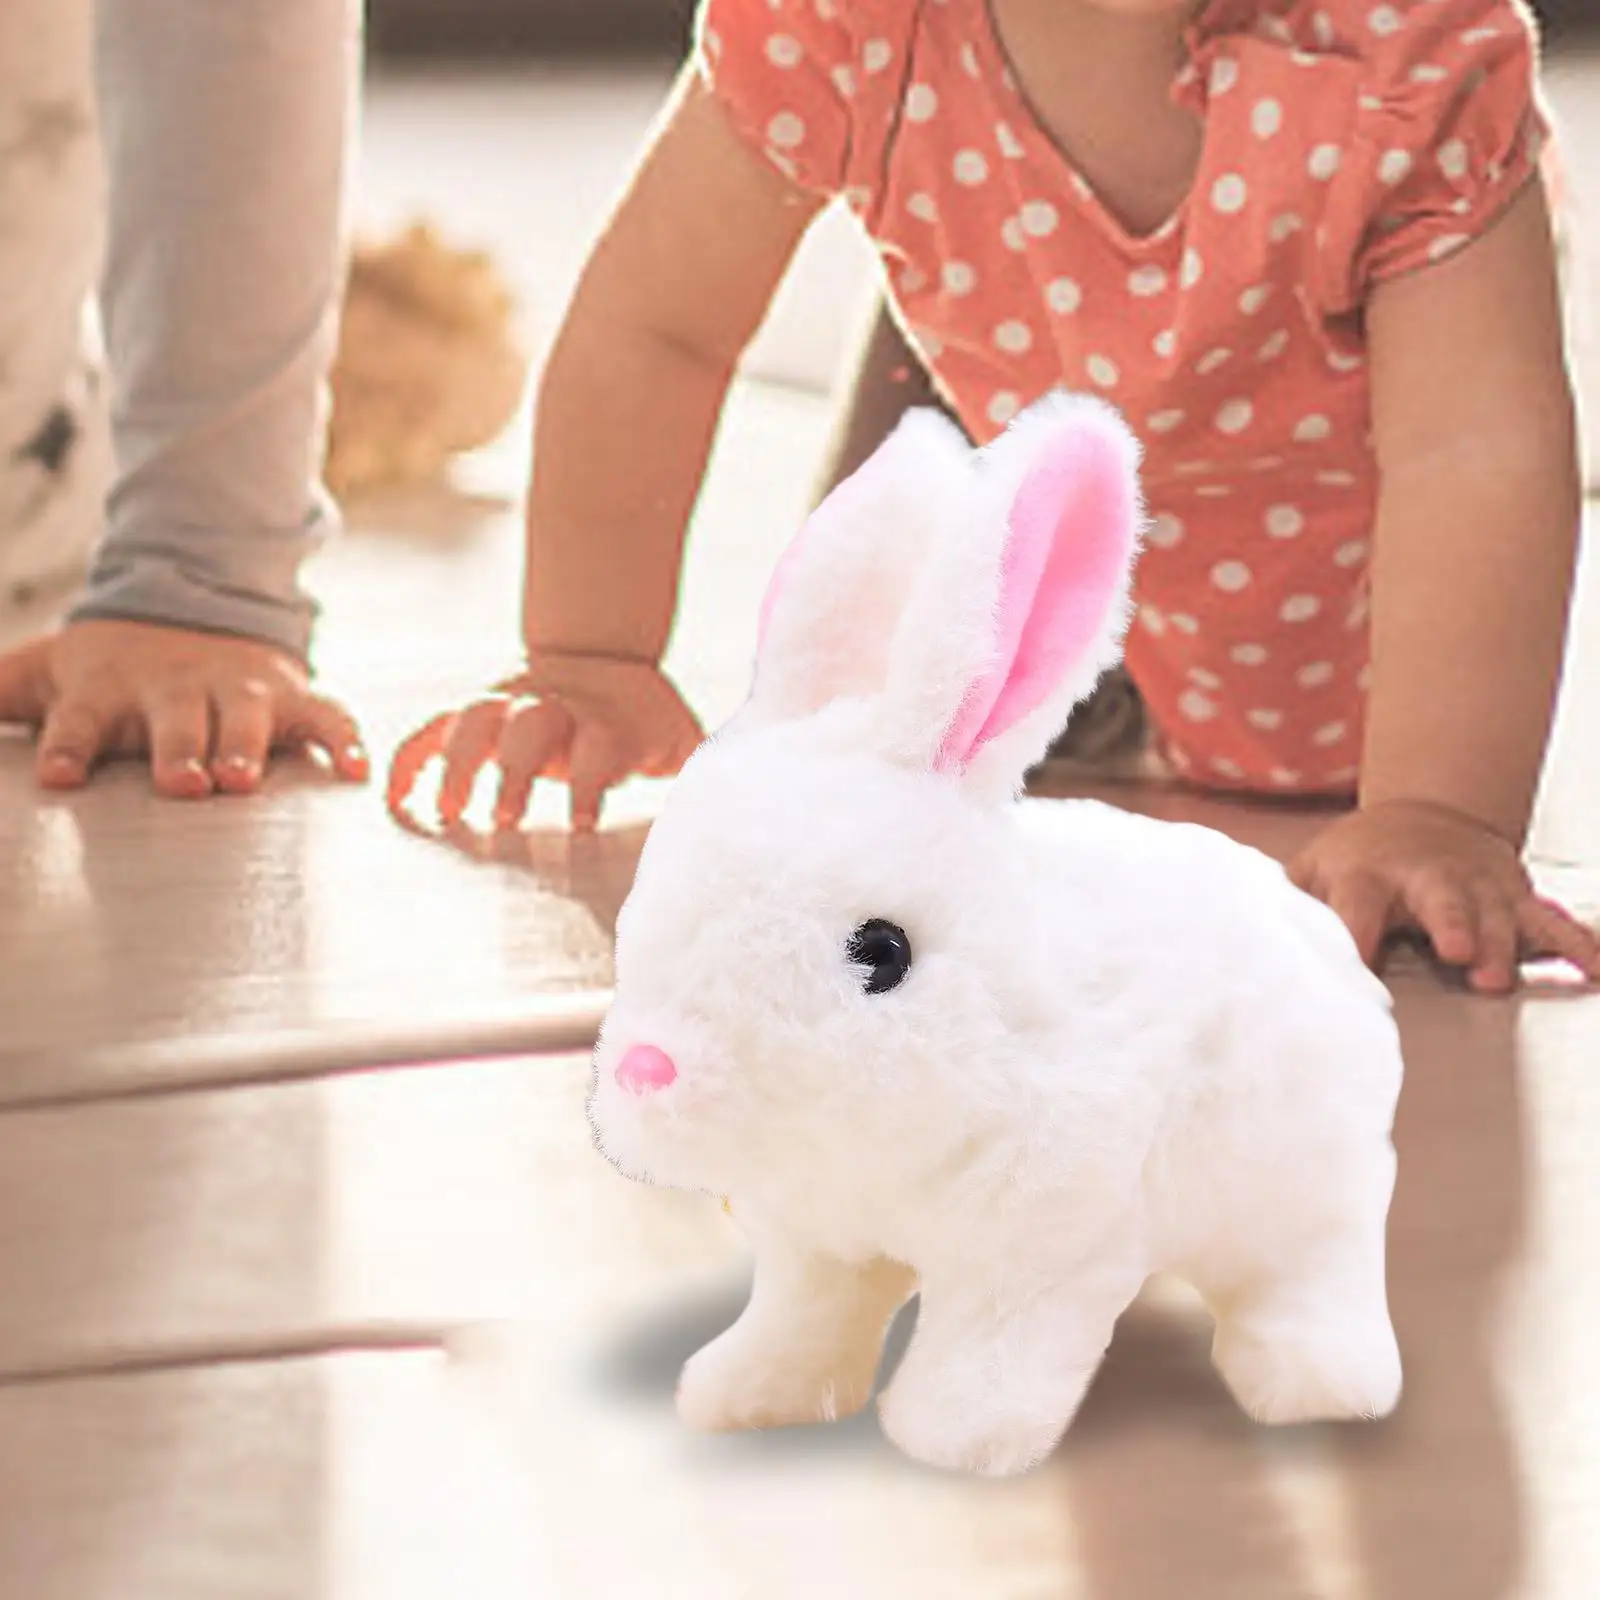 Electronic Plush Rabbit Toy Stuffed Animal Adorable for Gifts Party Favors